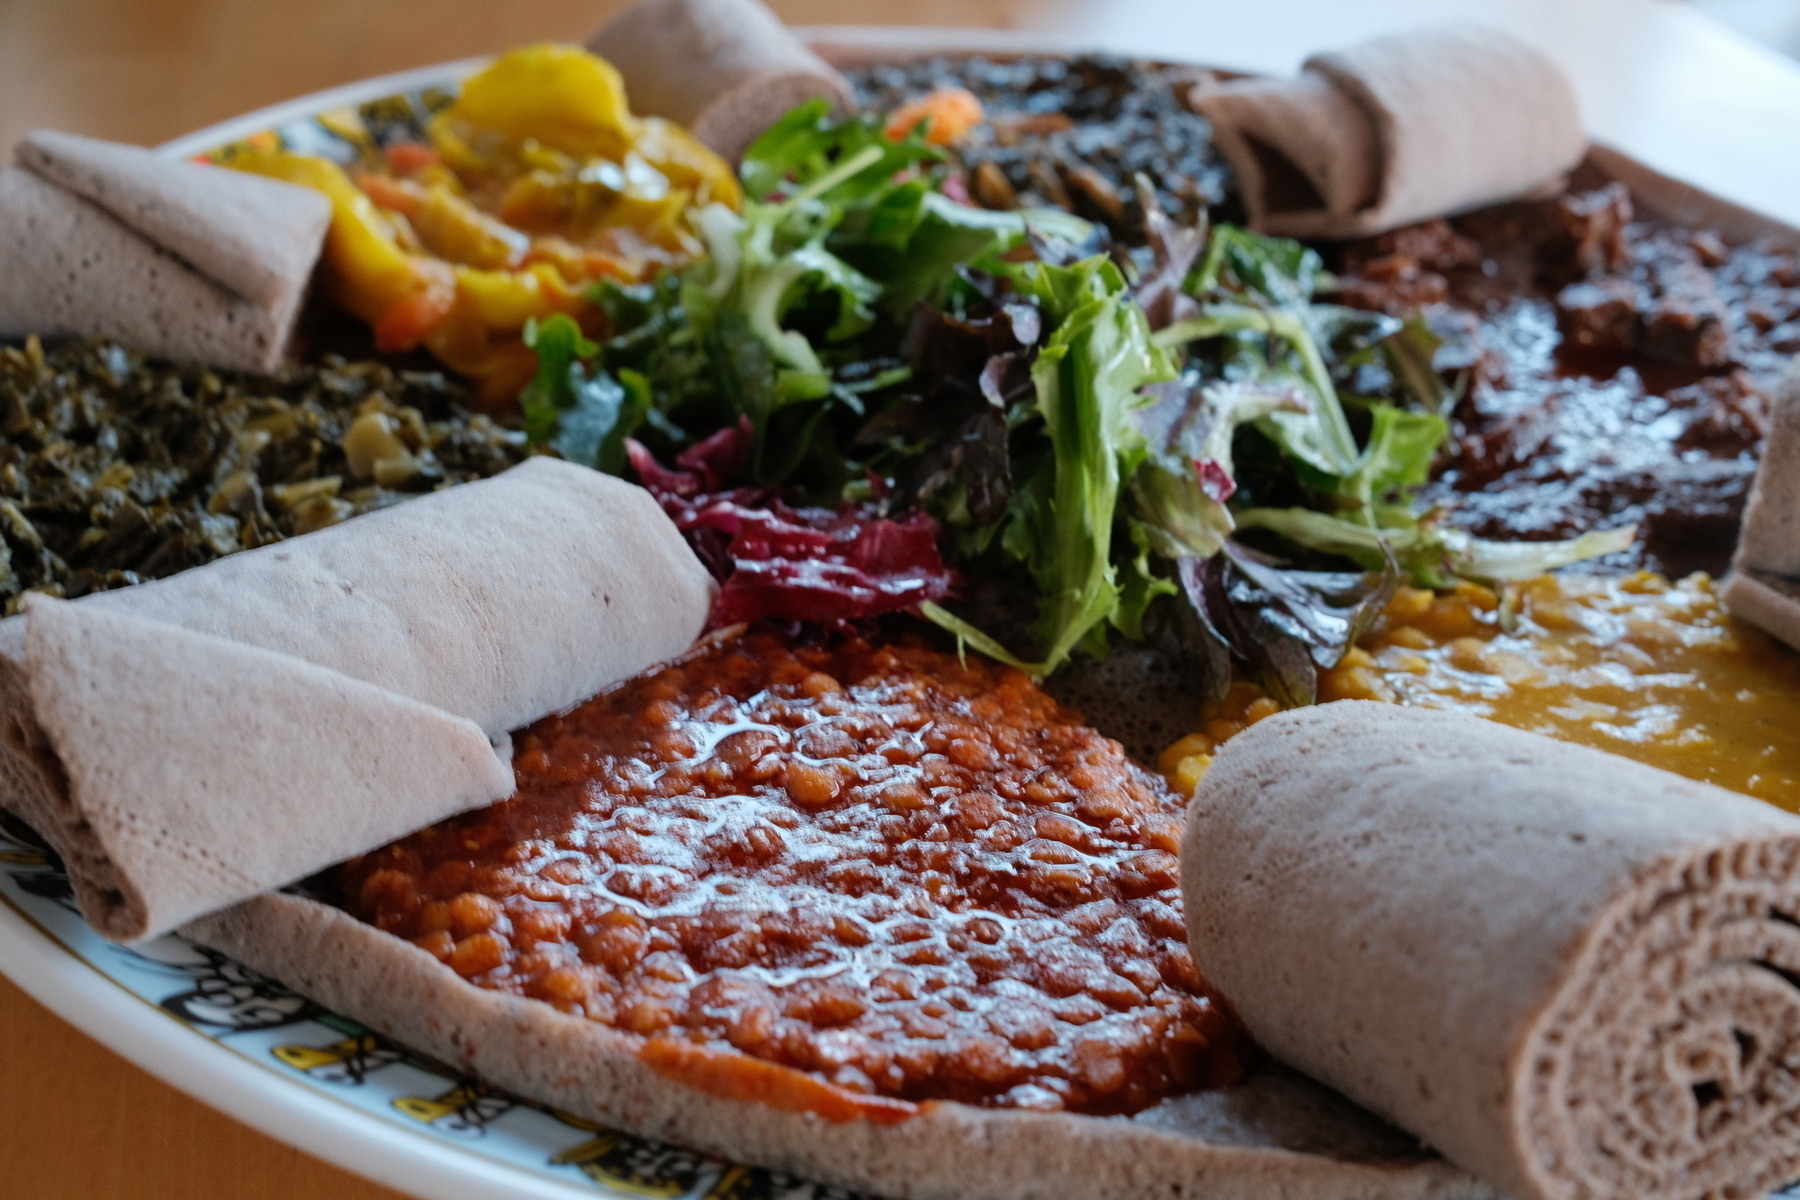 Plate of Ethiopian cuisine with injera bread rolls, lentils, cooked greens, and salad.